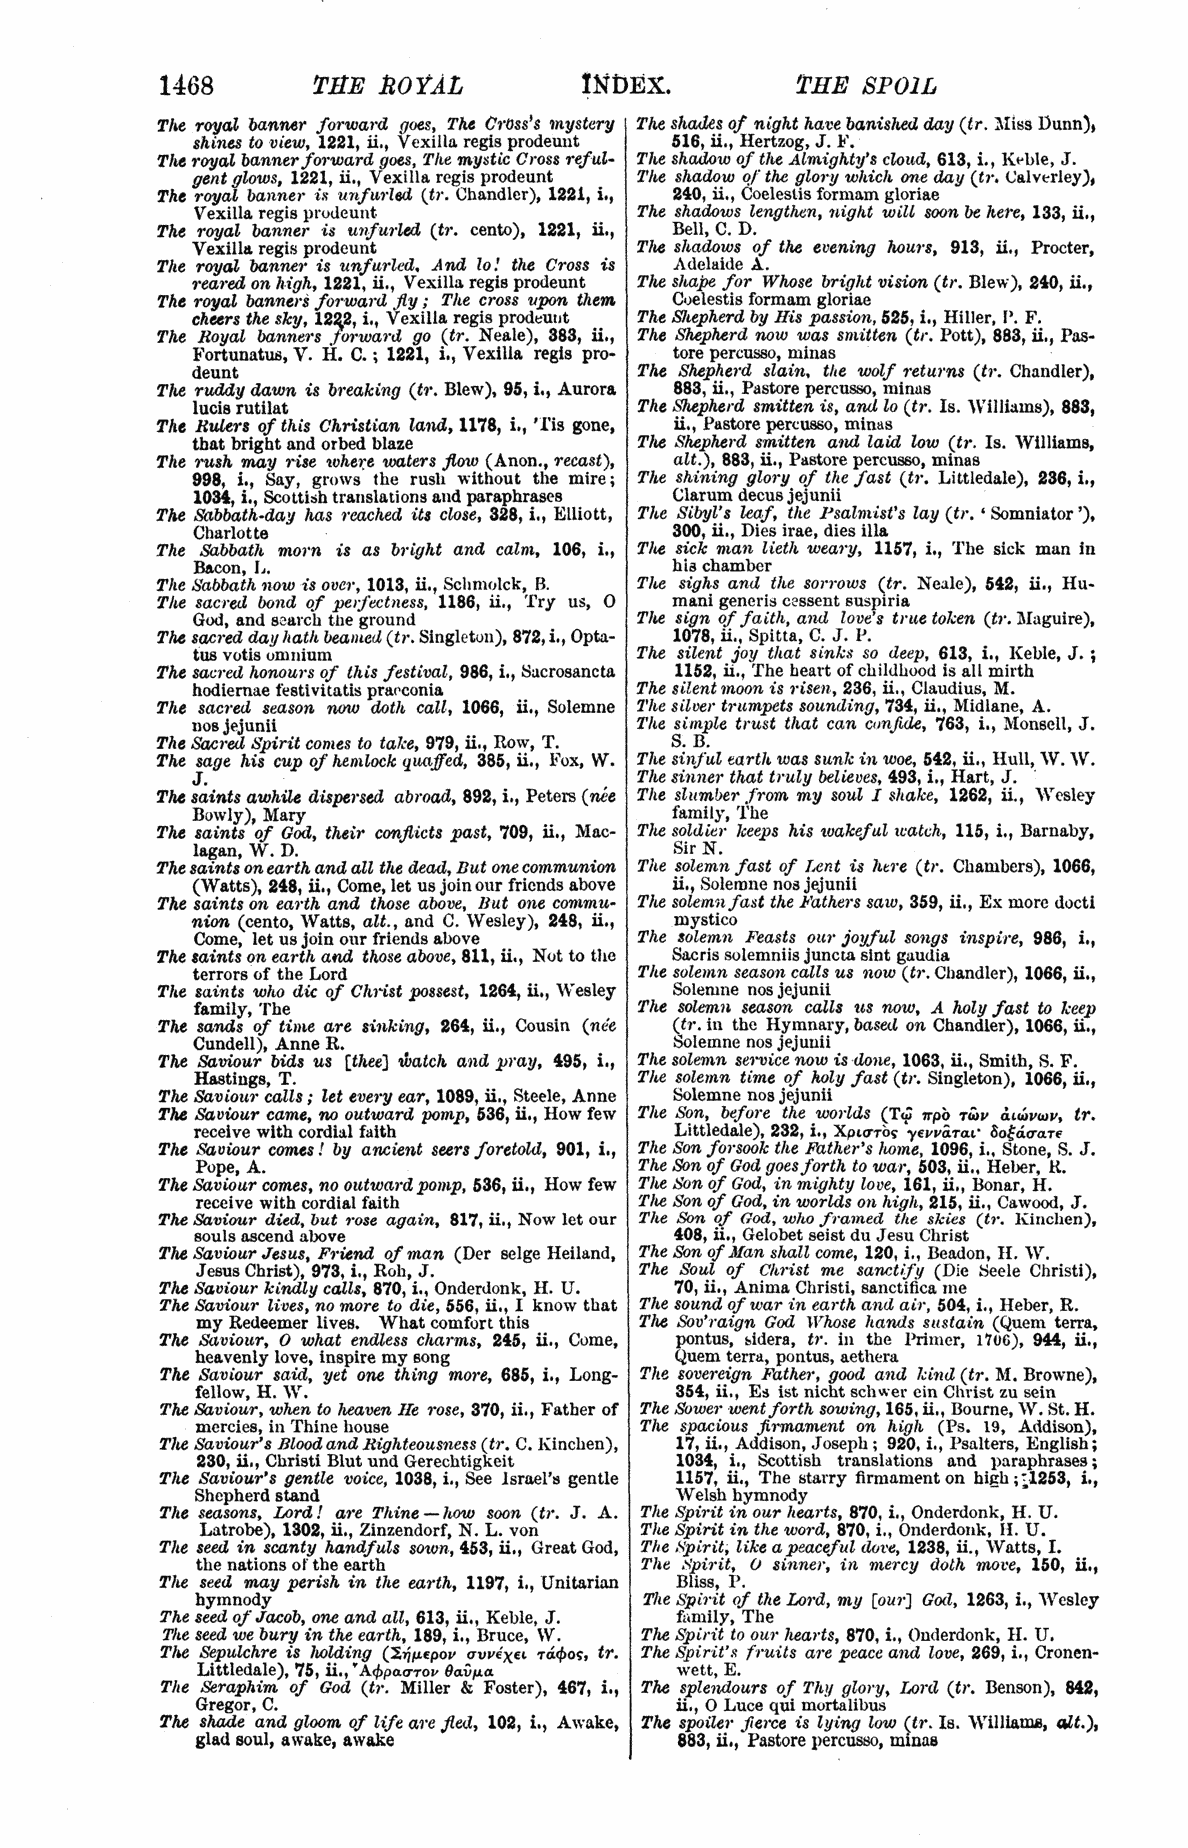 Image of page 1468